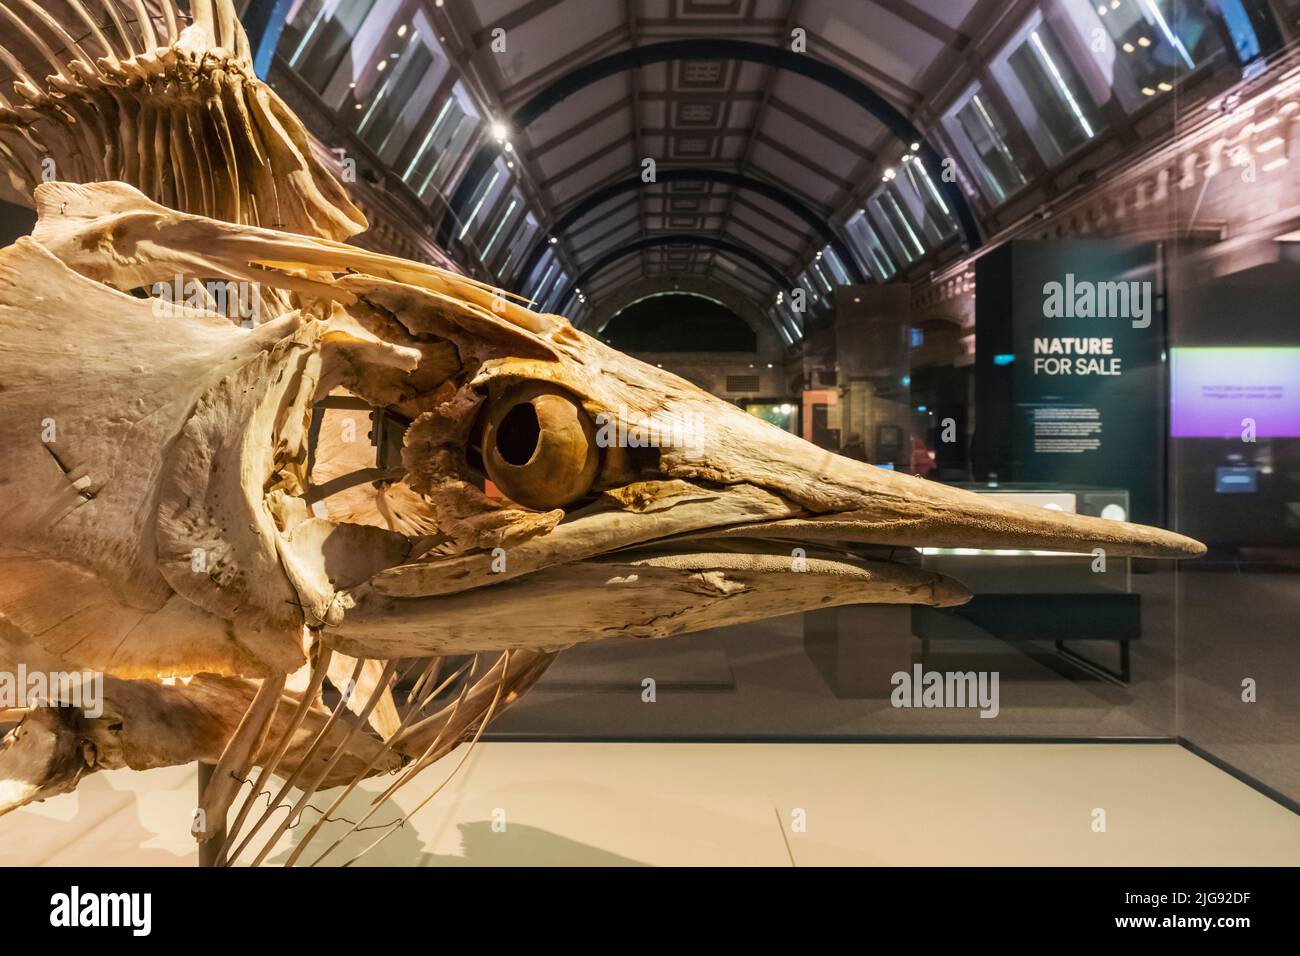 England, London, South Kensington, Natural History Museum, Exhibit of a Skeleton of a Black Marlin Fish Stock Photo